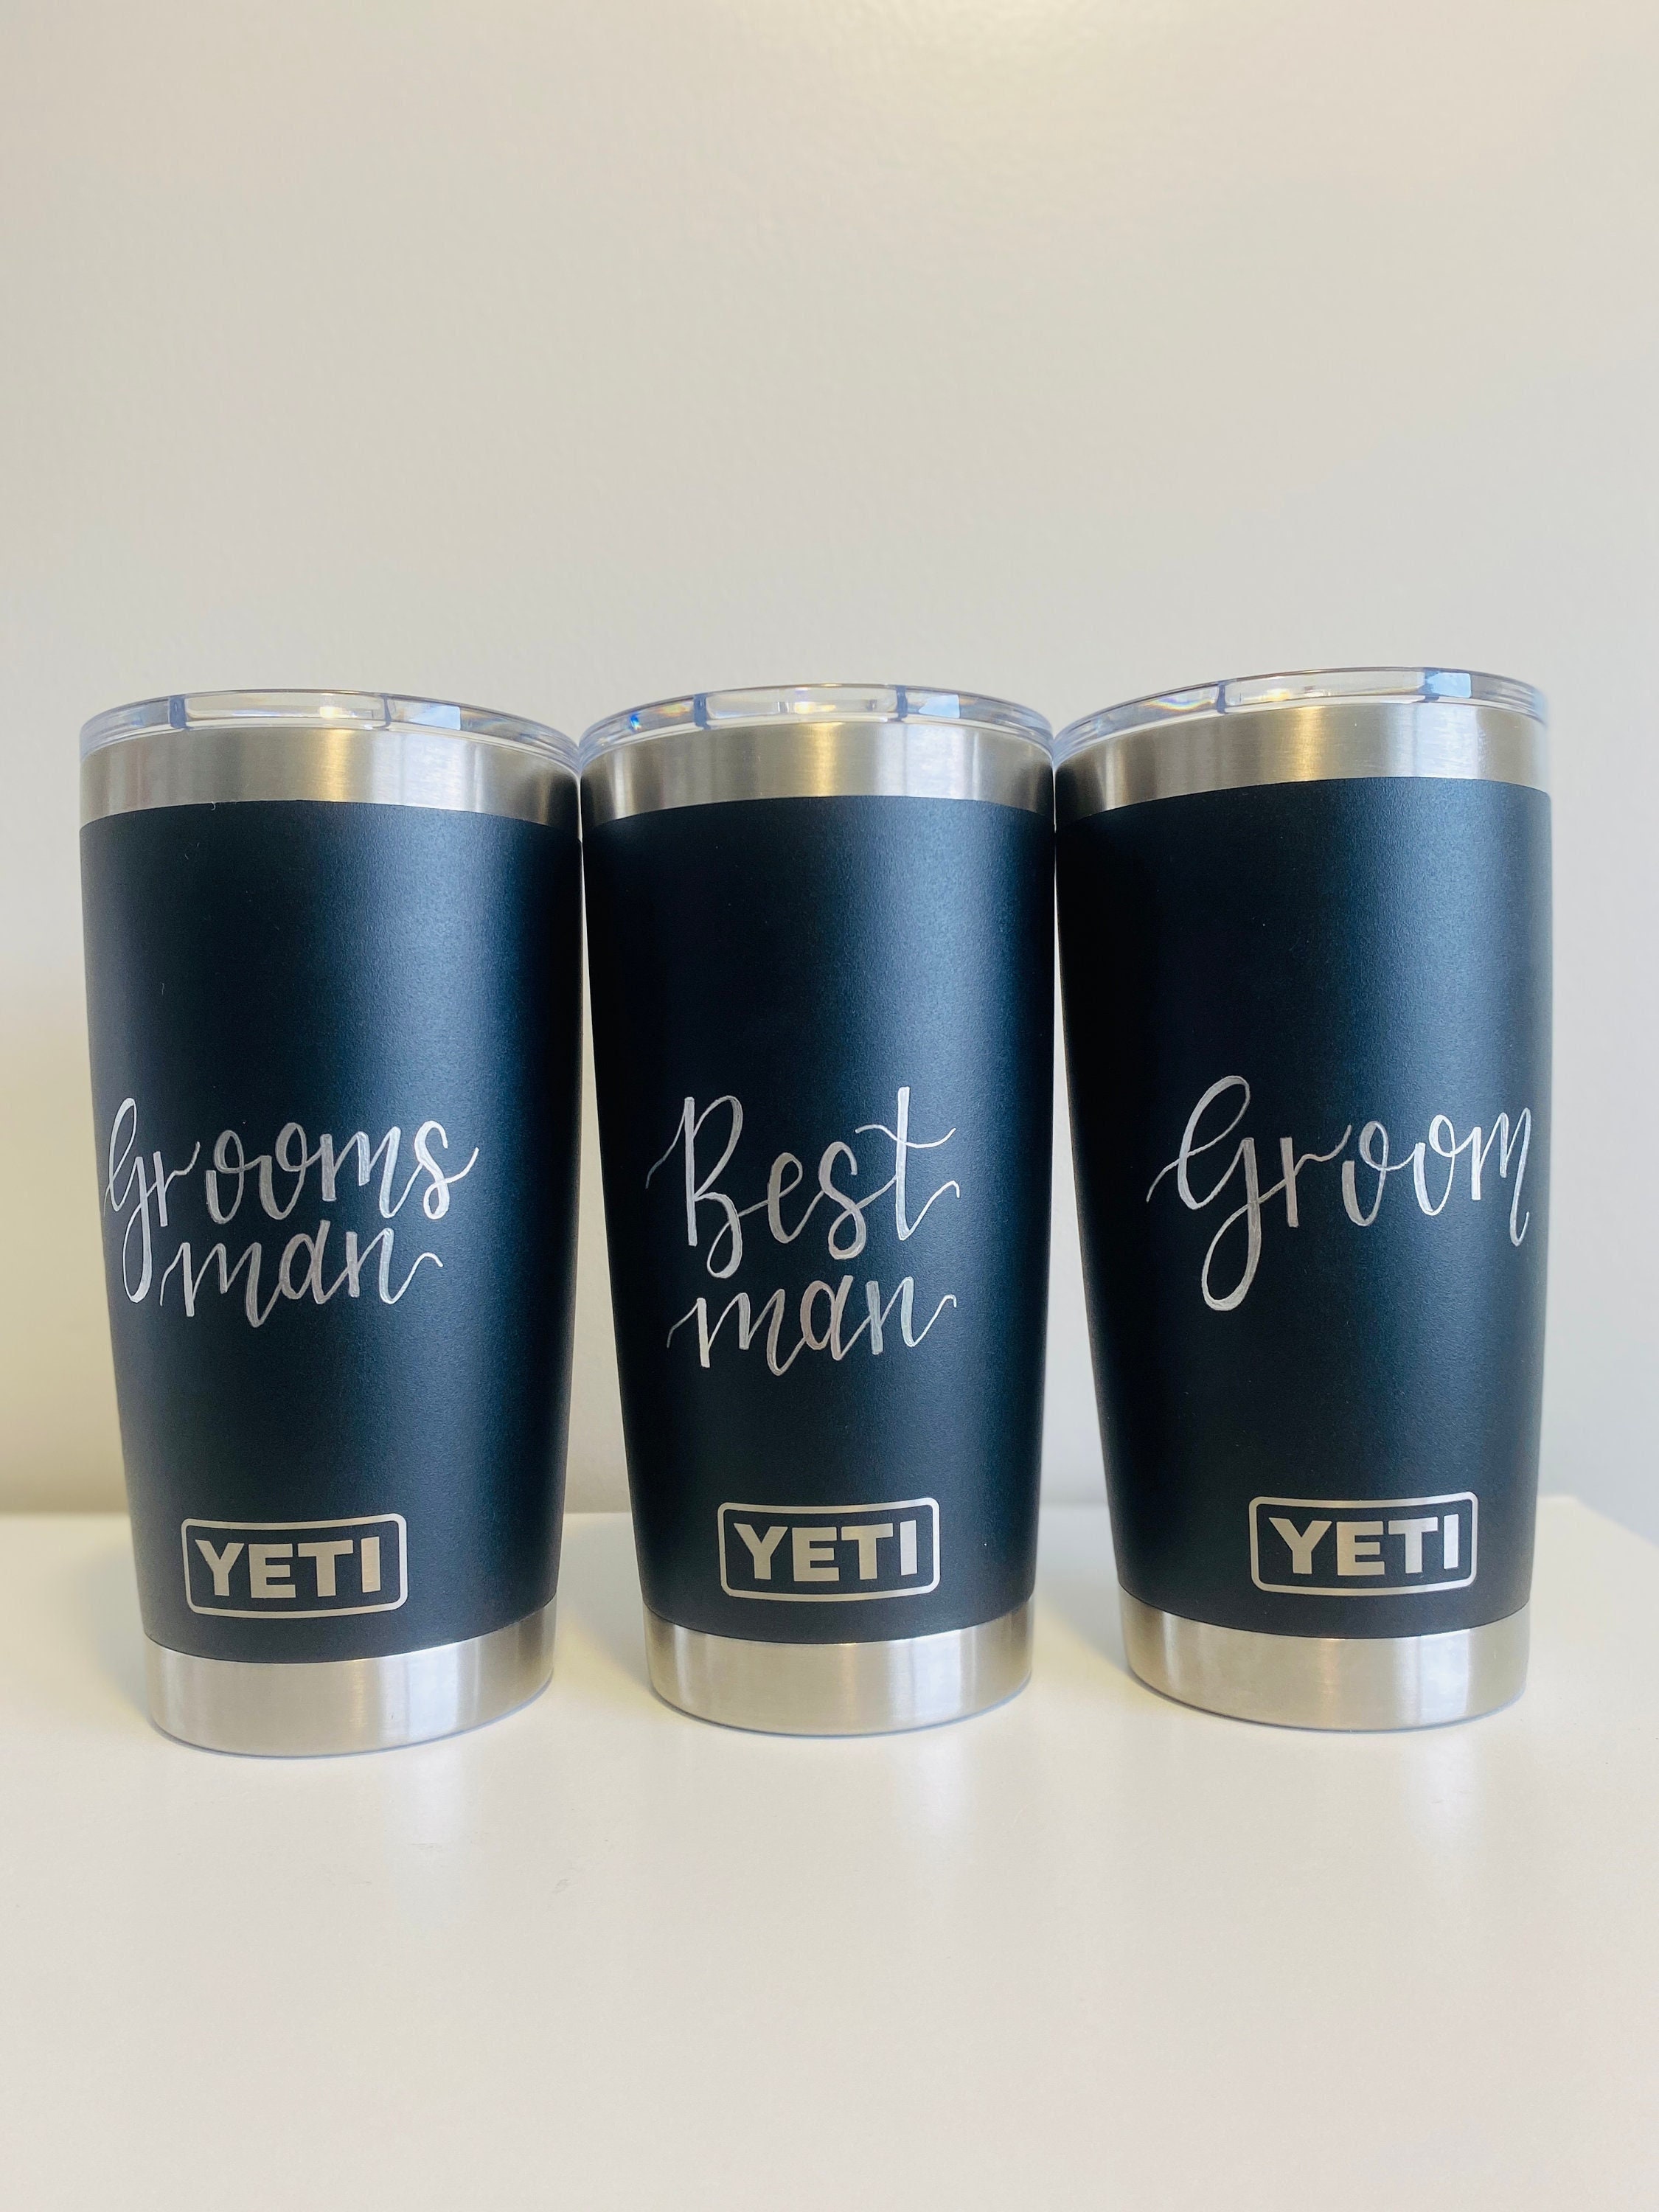 Personalized Engraved YETI® W/ Lid or Polar Camel Wine Tumbler Monogram,  Classic, Initials, Bridesmaid Gift, Maid, Matron, Mother of The, IM 